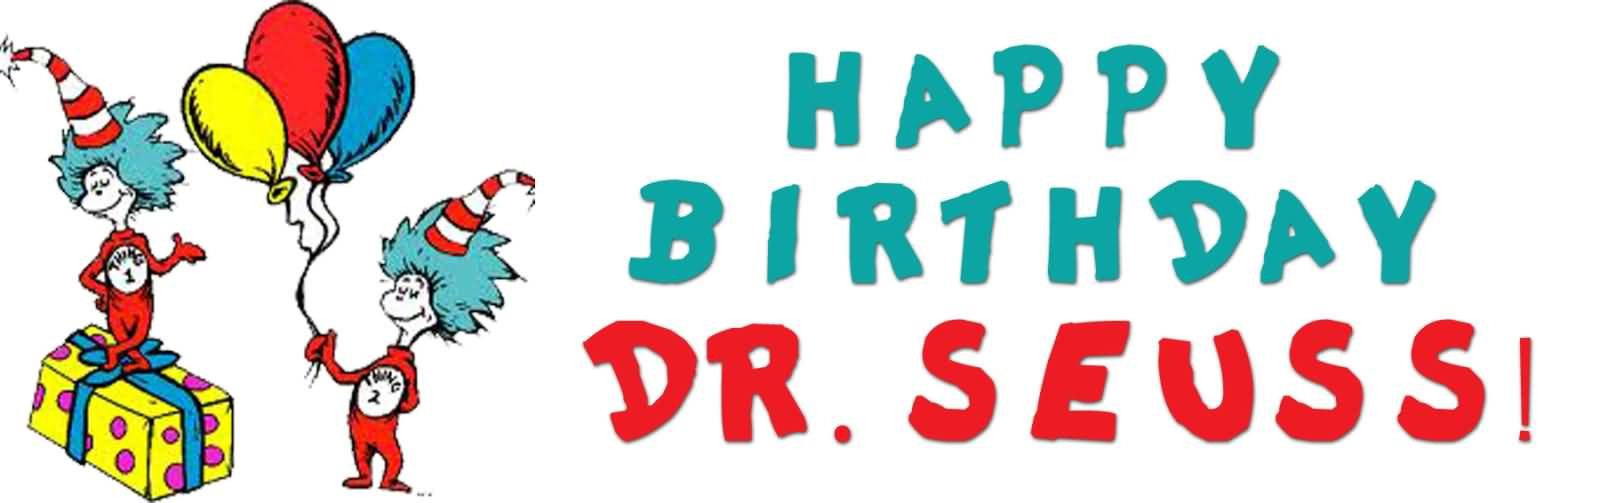 Dr Suess Birthday Quotes
 20 Dr Seuss Day Wish And s